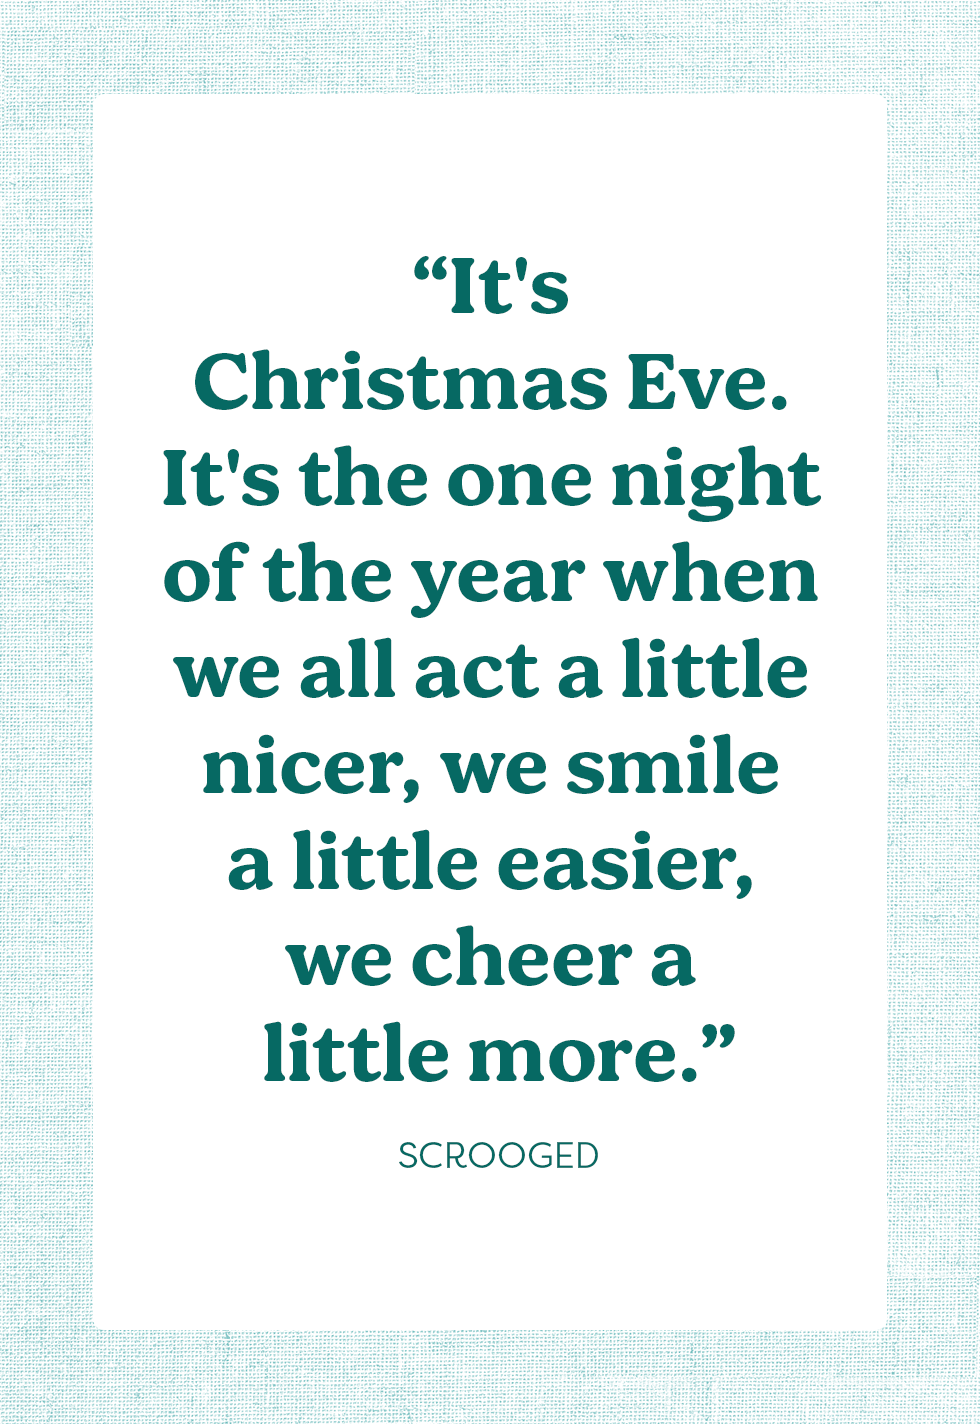 25 Best Christmas Movie Quotes and Famous Christmas Movie Sayings